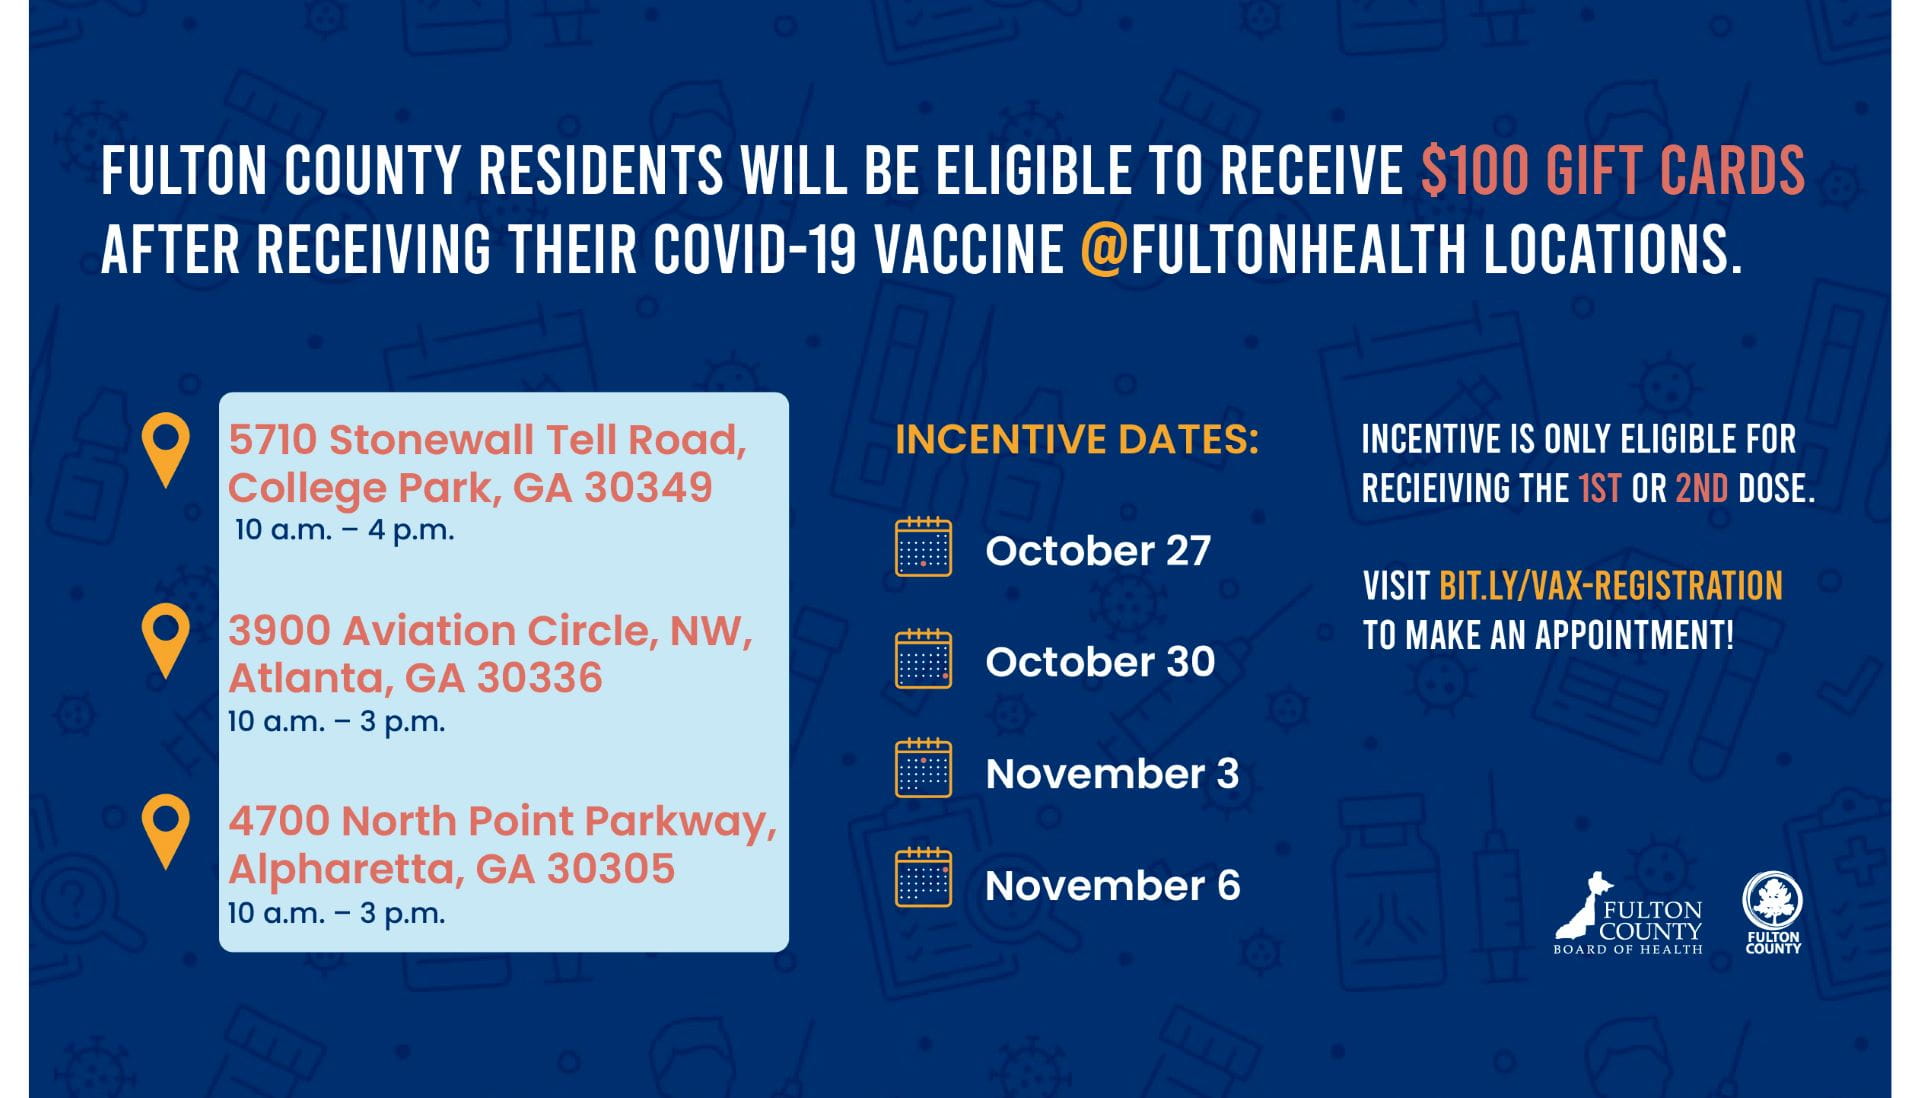 Fulton County to Offer Vaccination Incentives to Public